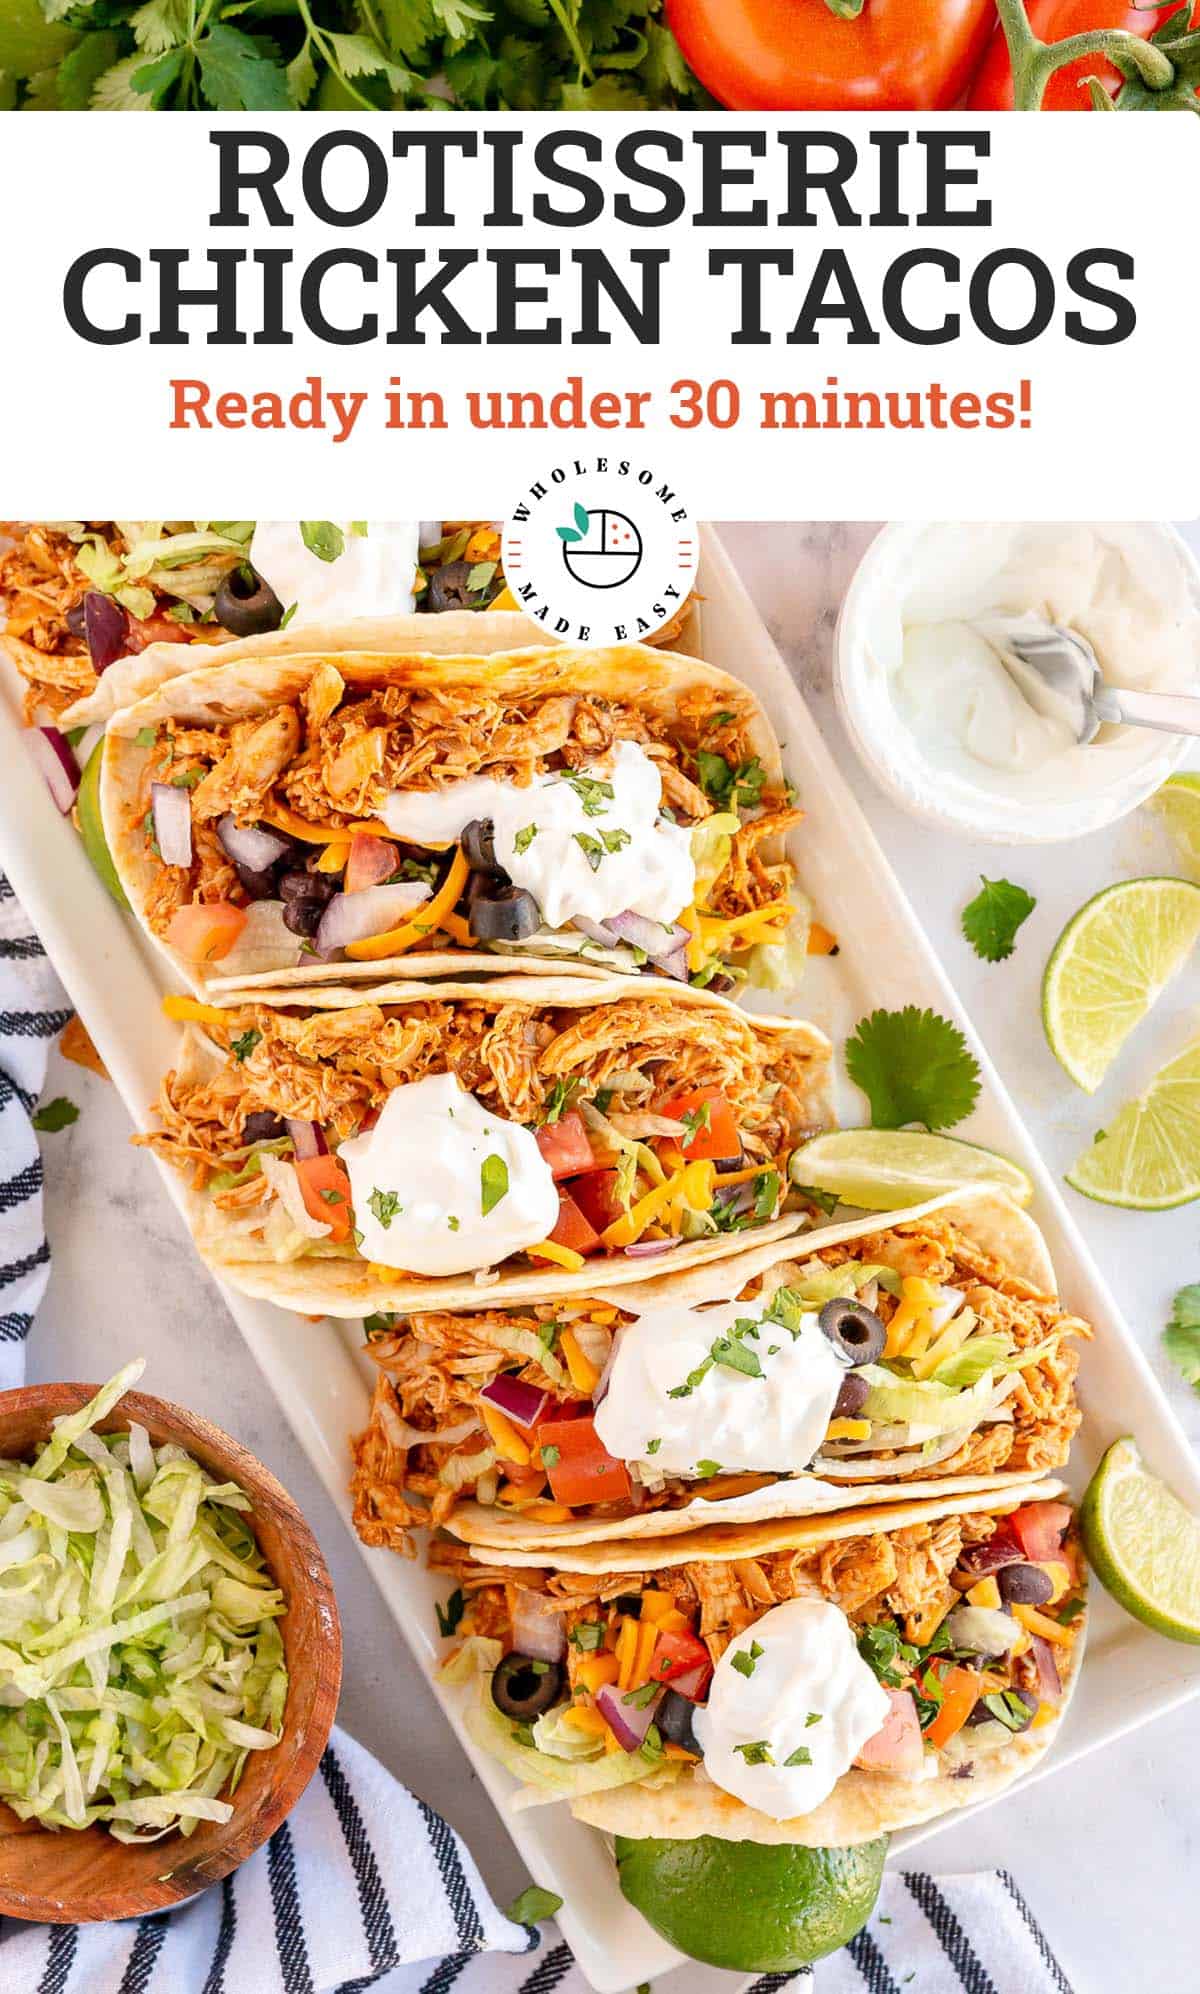 An over the top shot of Rotisserie Chicken Tacos on a white platter with overlay text.